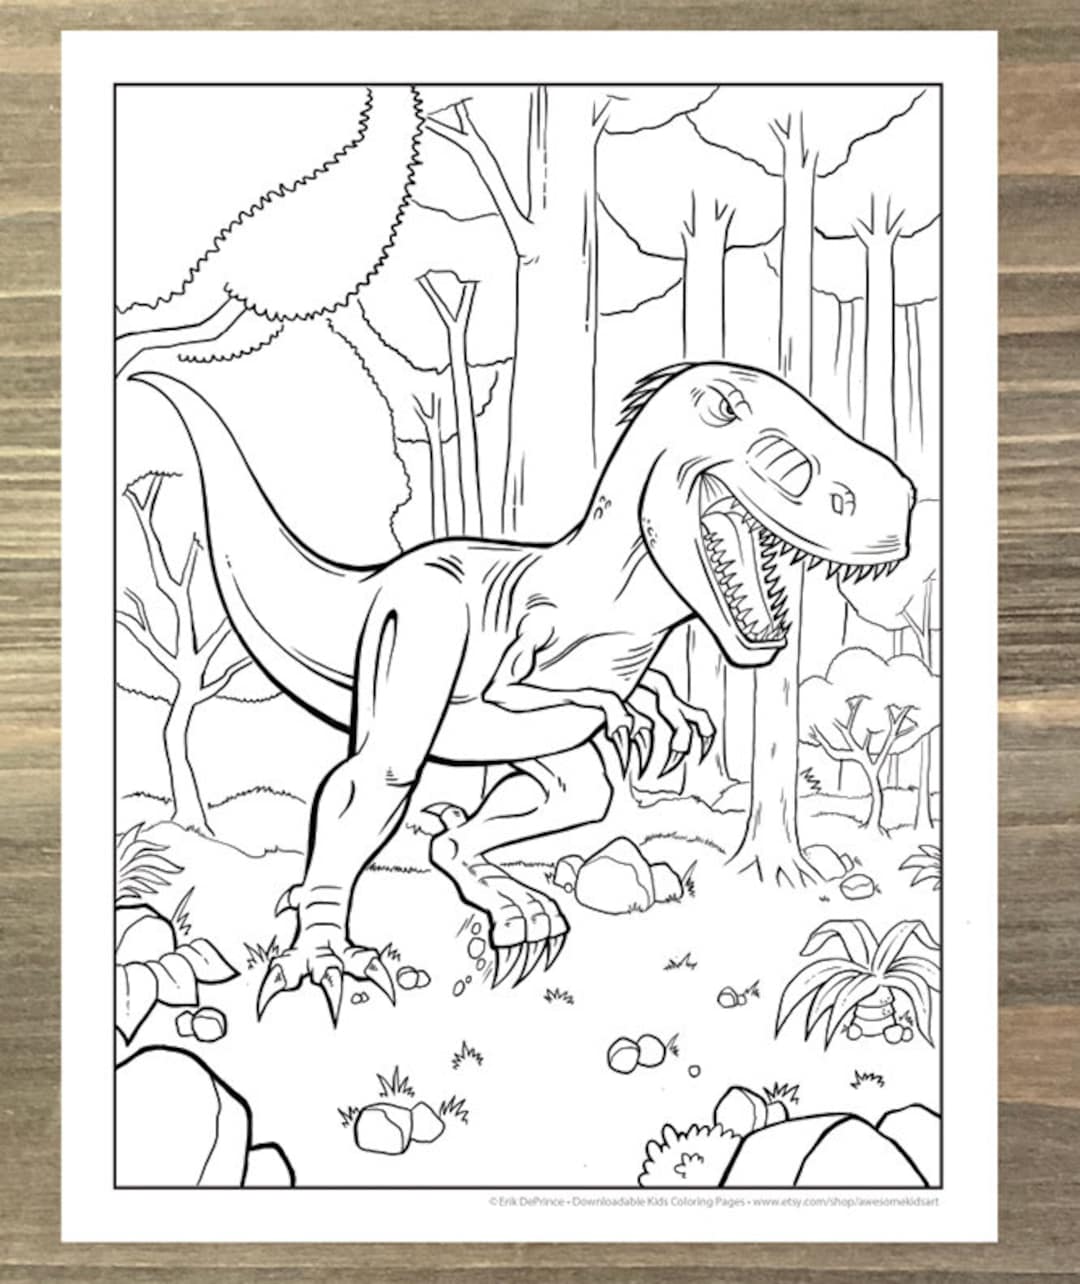 20 Baby Dinosaur Fantasy Coloring Page Book, Adults kids- Instant Download  Grayscale Coloring Page, Printable PDF, T rex , raptor coloring - Payhip